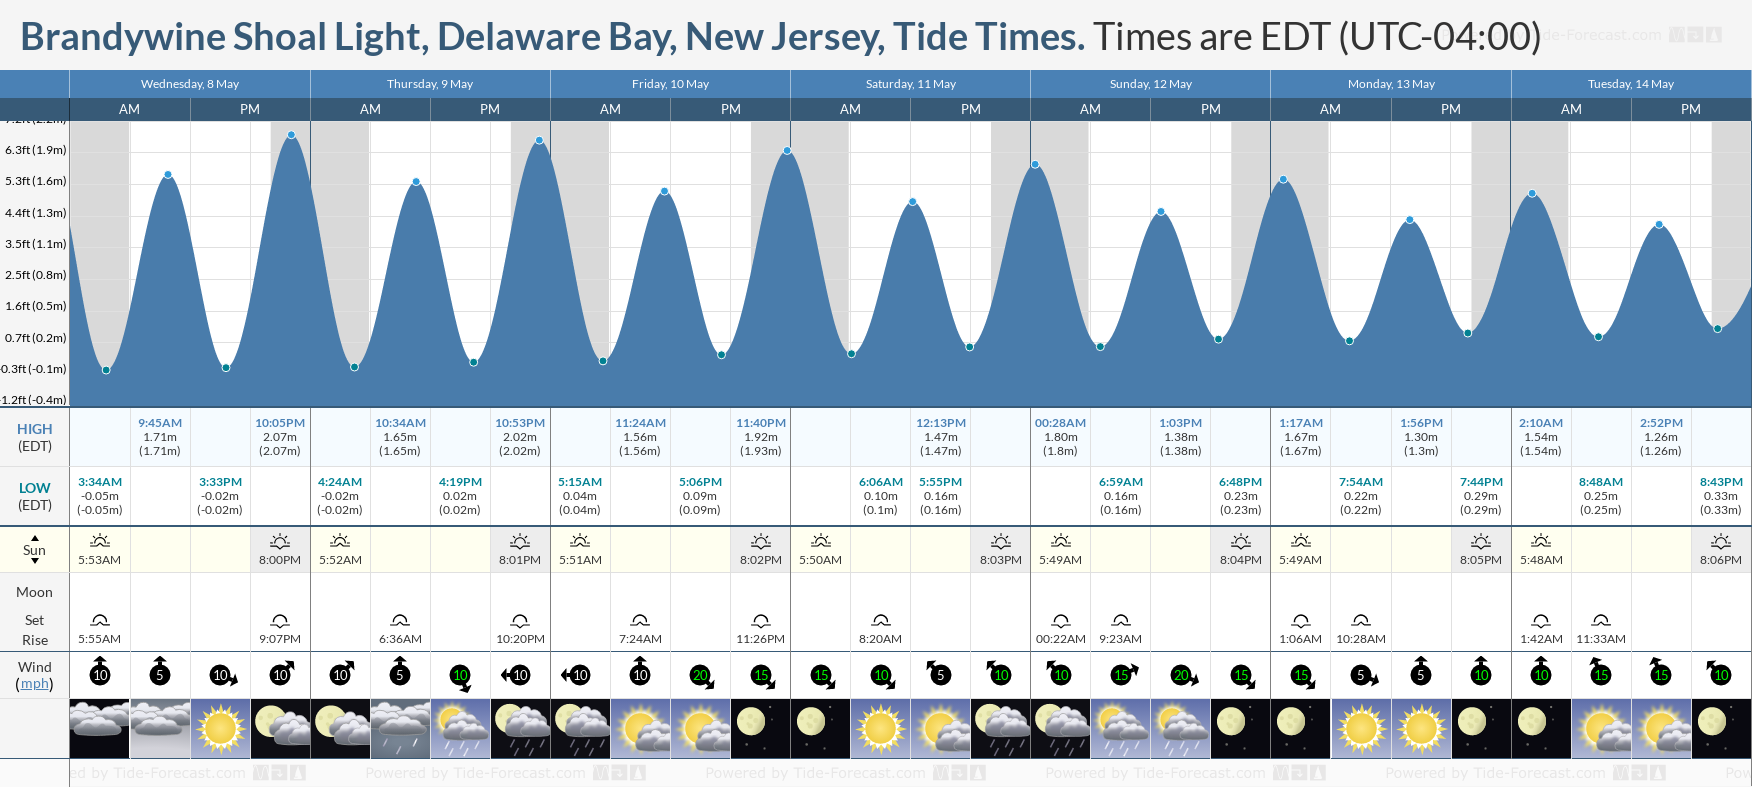 Brandywine Shoal Light, Delaware Bay, New Jersey Tide Chart including high and low tide tide times for the next 7 days